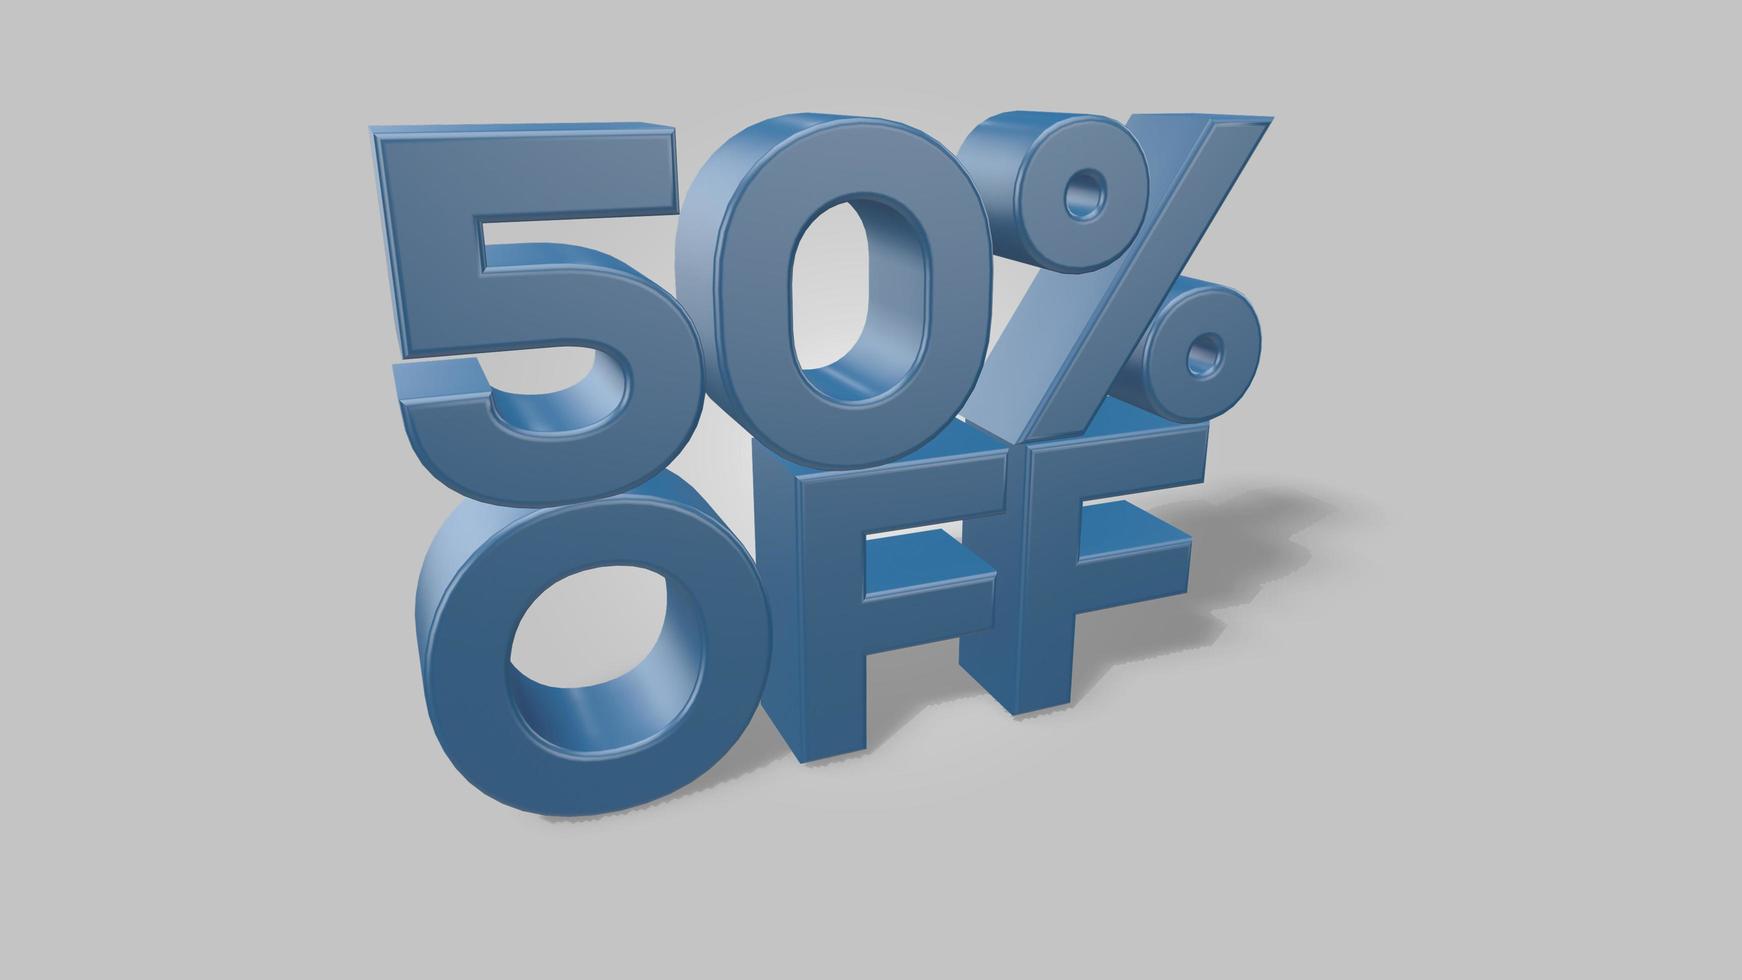 50 off 3d illustration use for landing page, template, ui, web, poster, banner, flyer, background, gift card, coupon, label, wallpaper,sale promotion,advertising, marketing photo